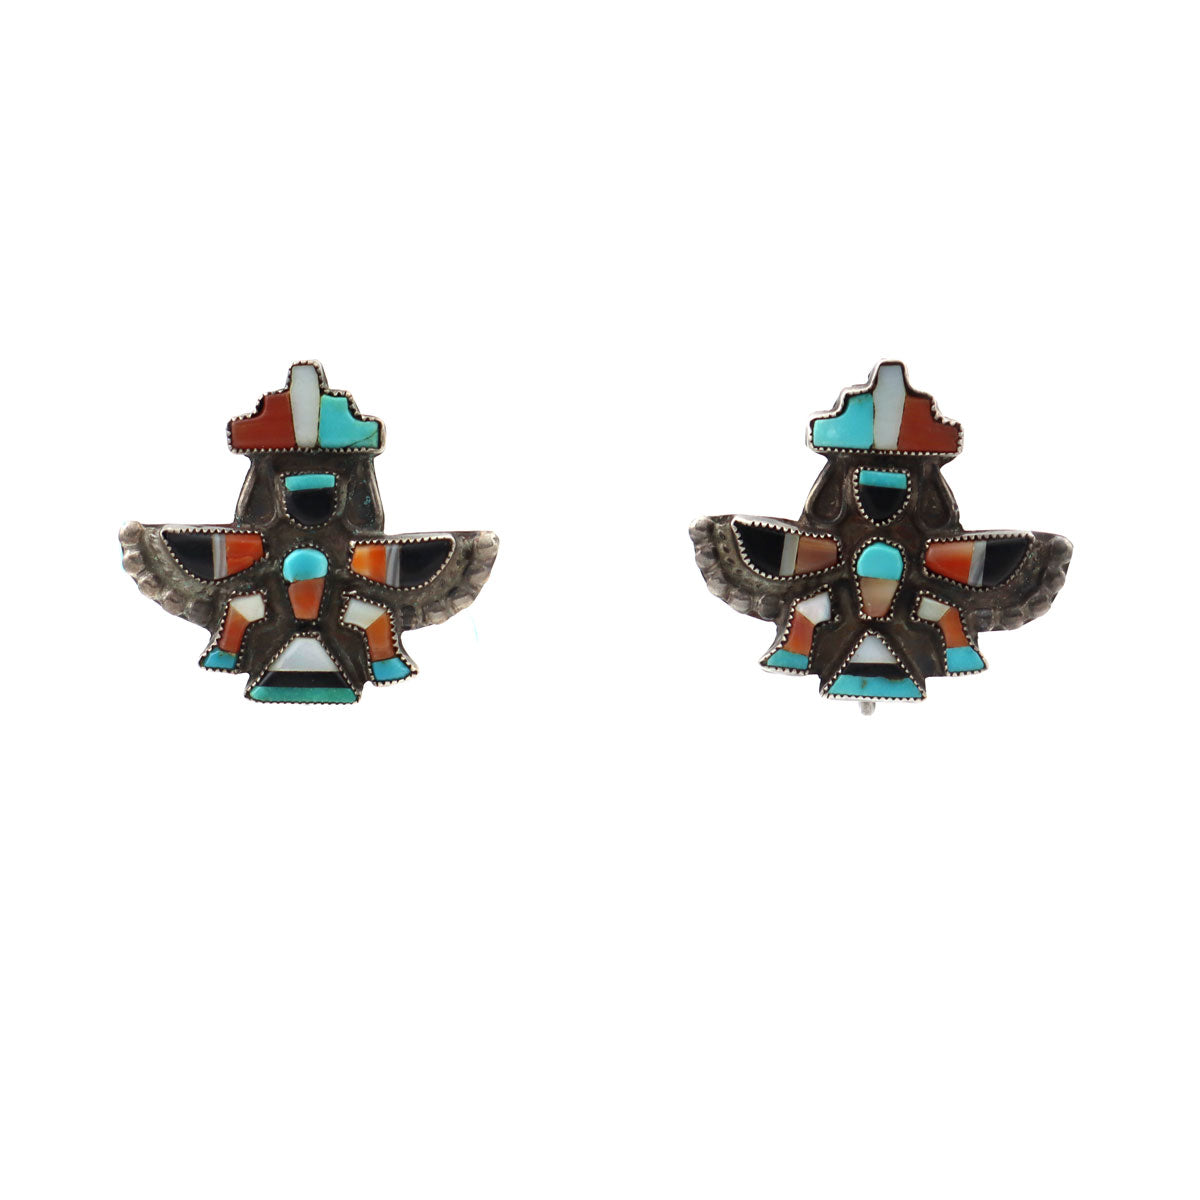 Zuni Multi-Stone Channel Inlay and Silver Knifewing God Earrings c. 1940s, 0.875" x 1" (J91051-0821-004)